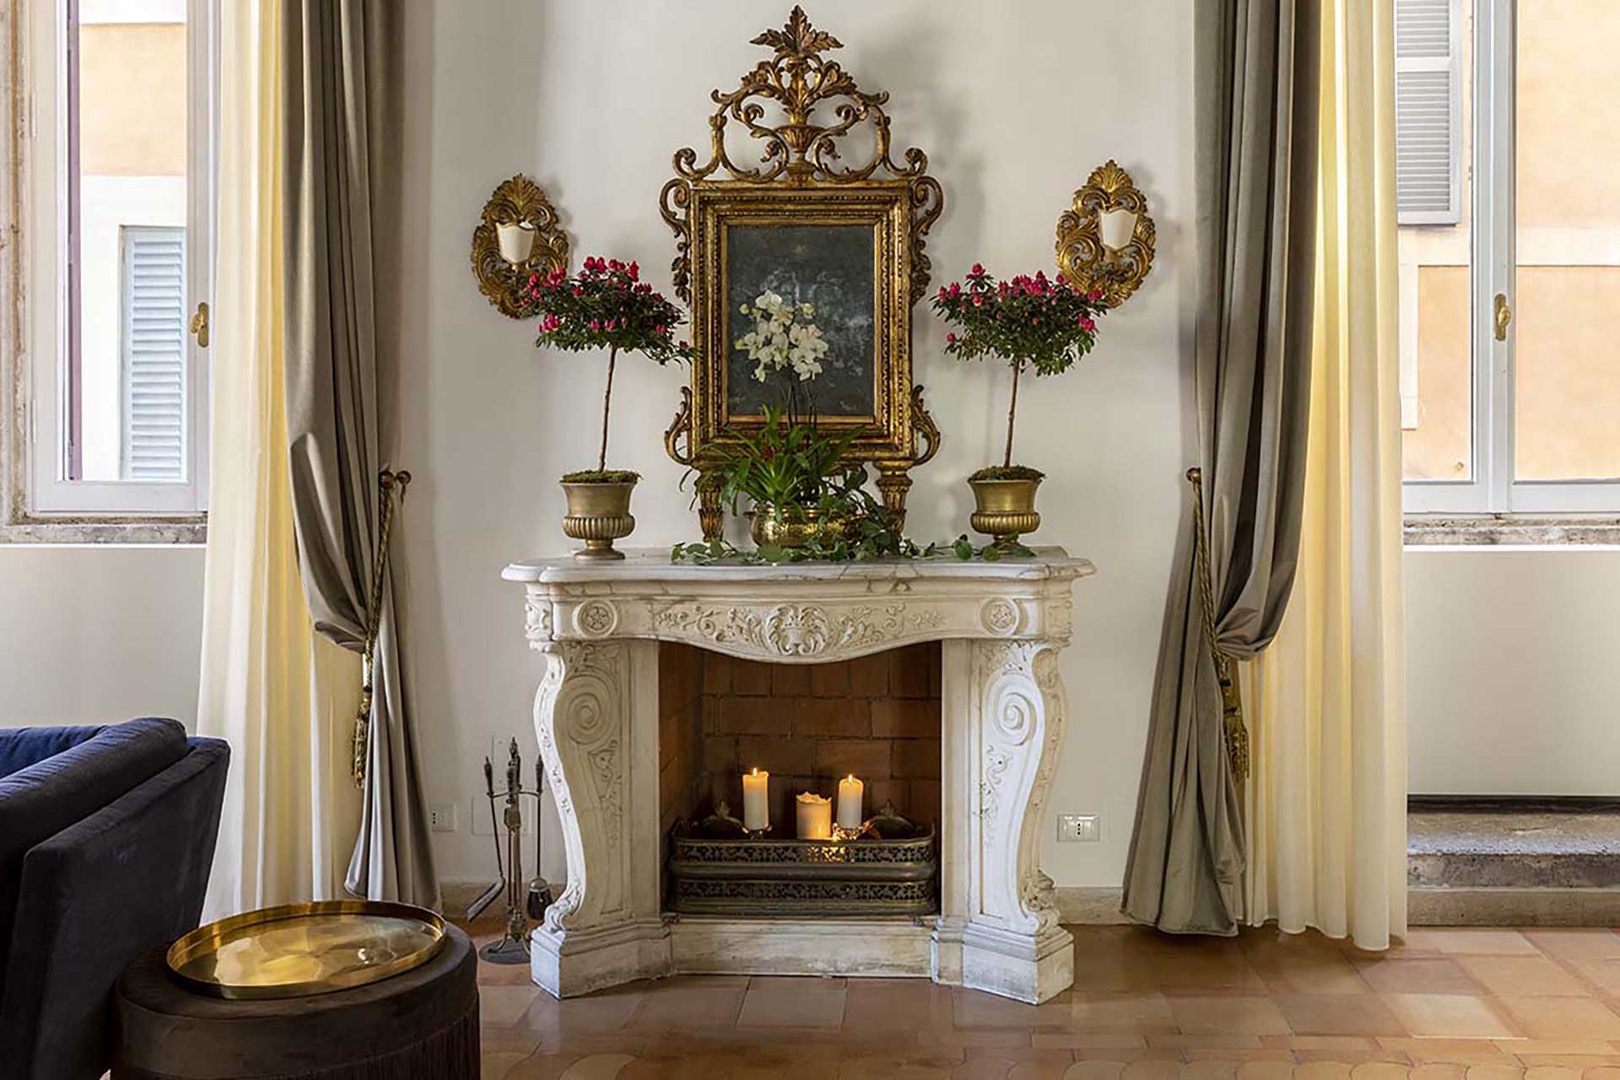 The fireplace and antique painting form a charming backdrop.